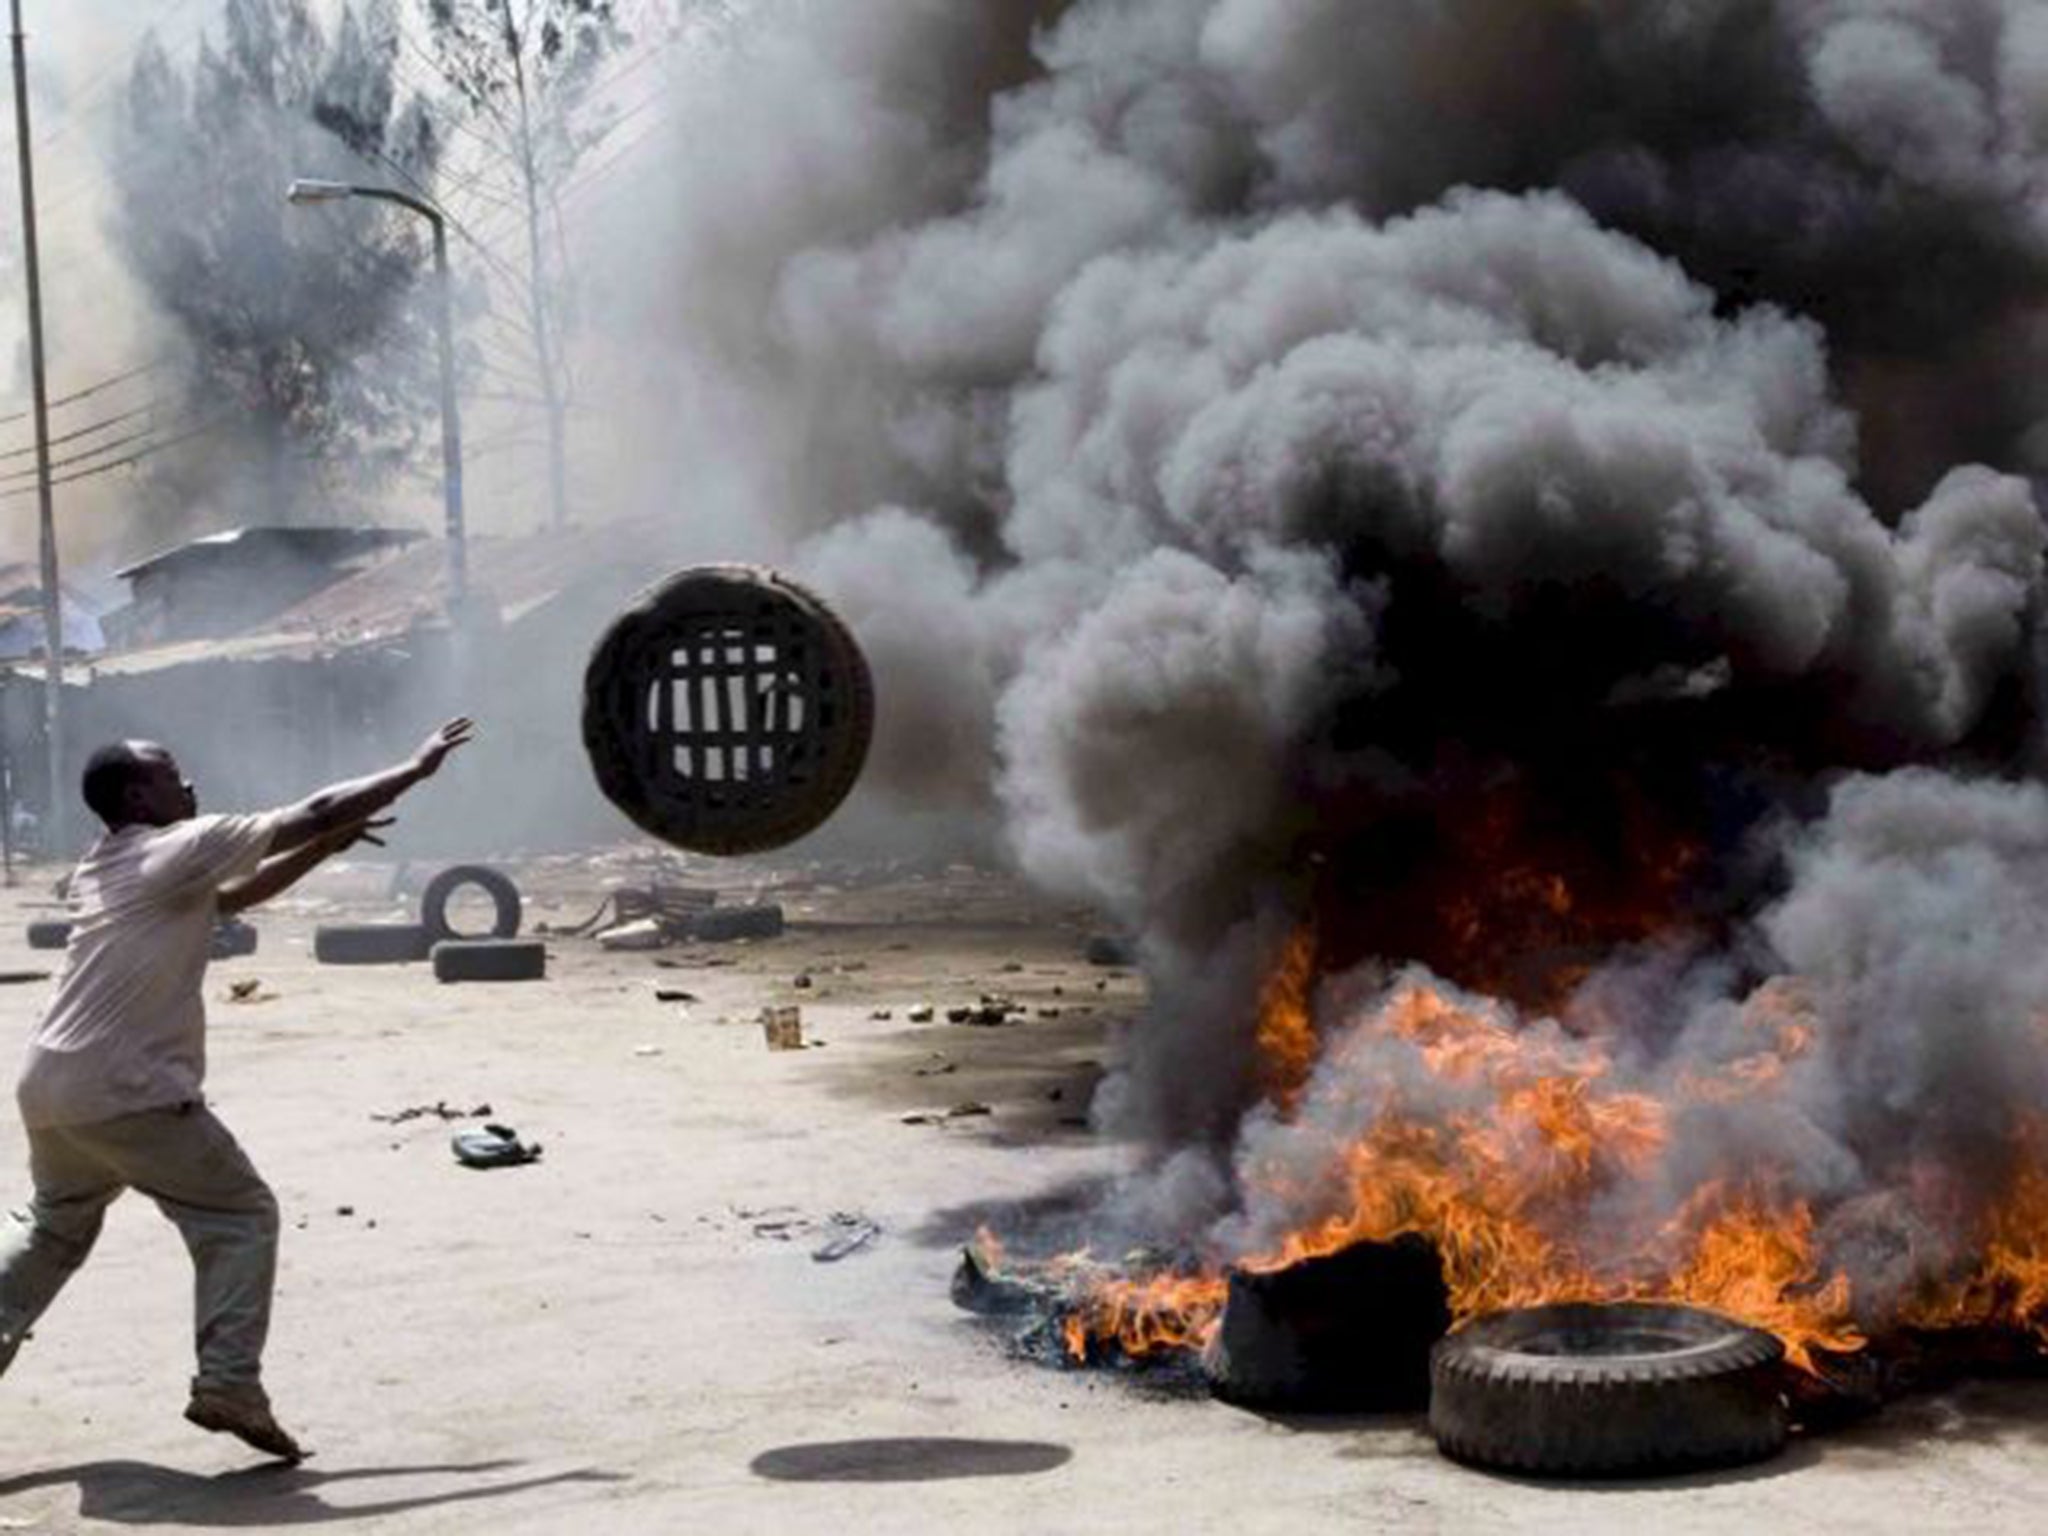 Riots broke out in Nairobi in 2007 after an allegedly rigged election